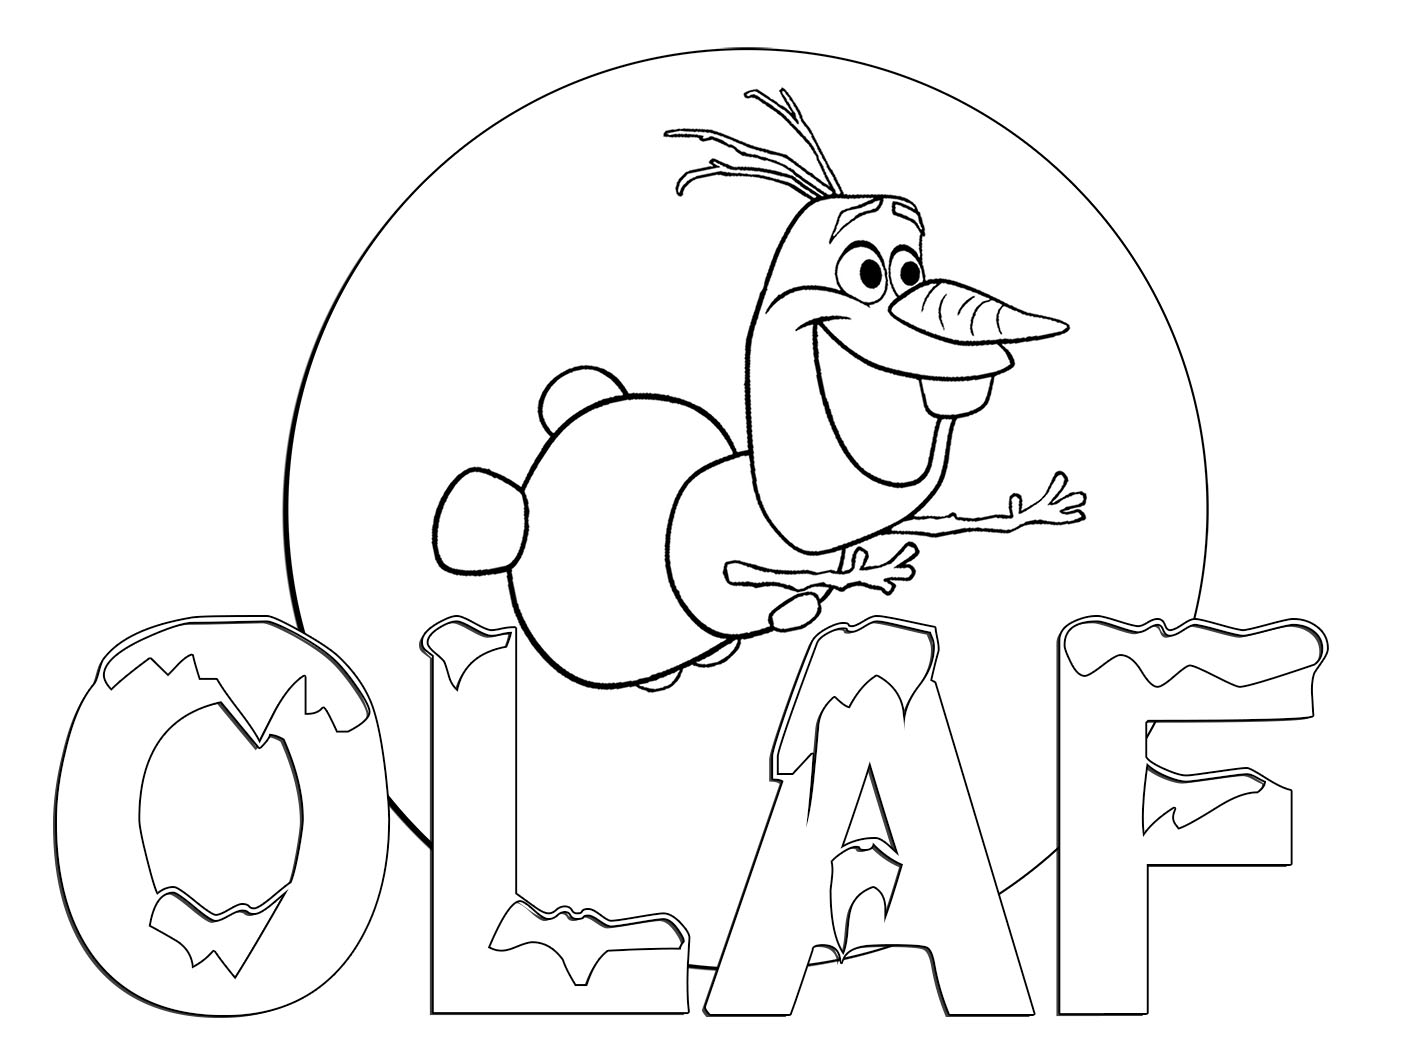 Frozen Coloring Pages Color pages FREE coloring pages for kids